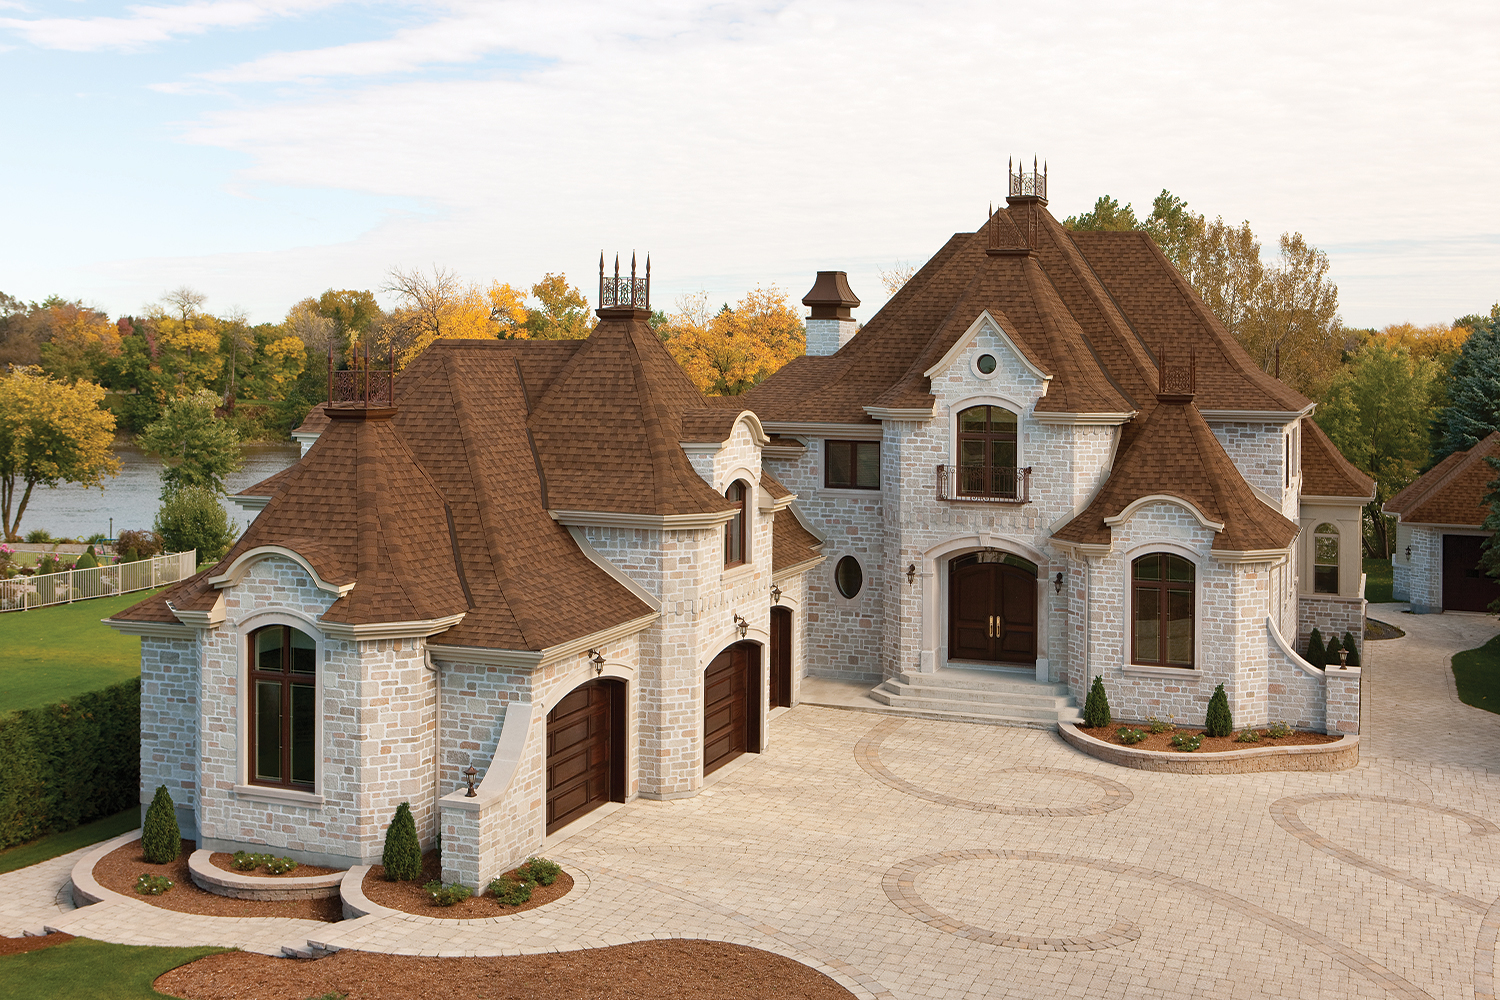 Asphalt roofing shingles in shades of brown